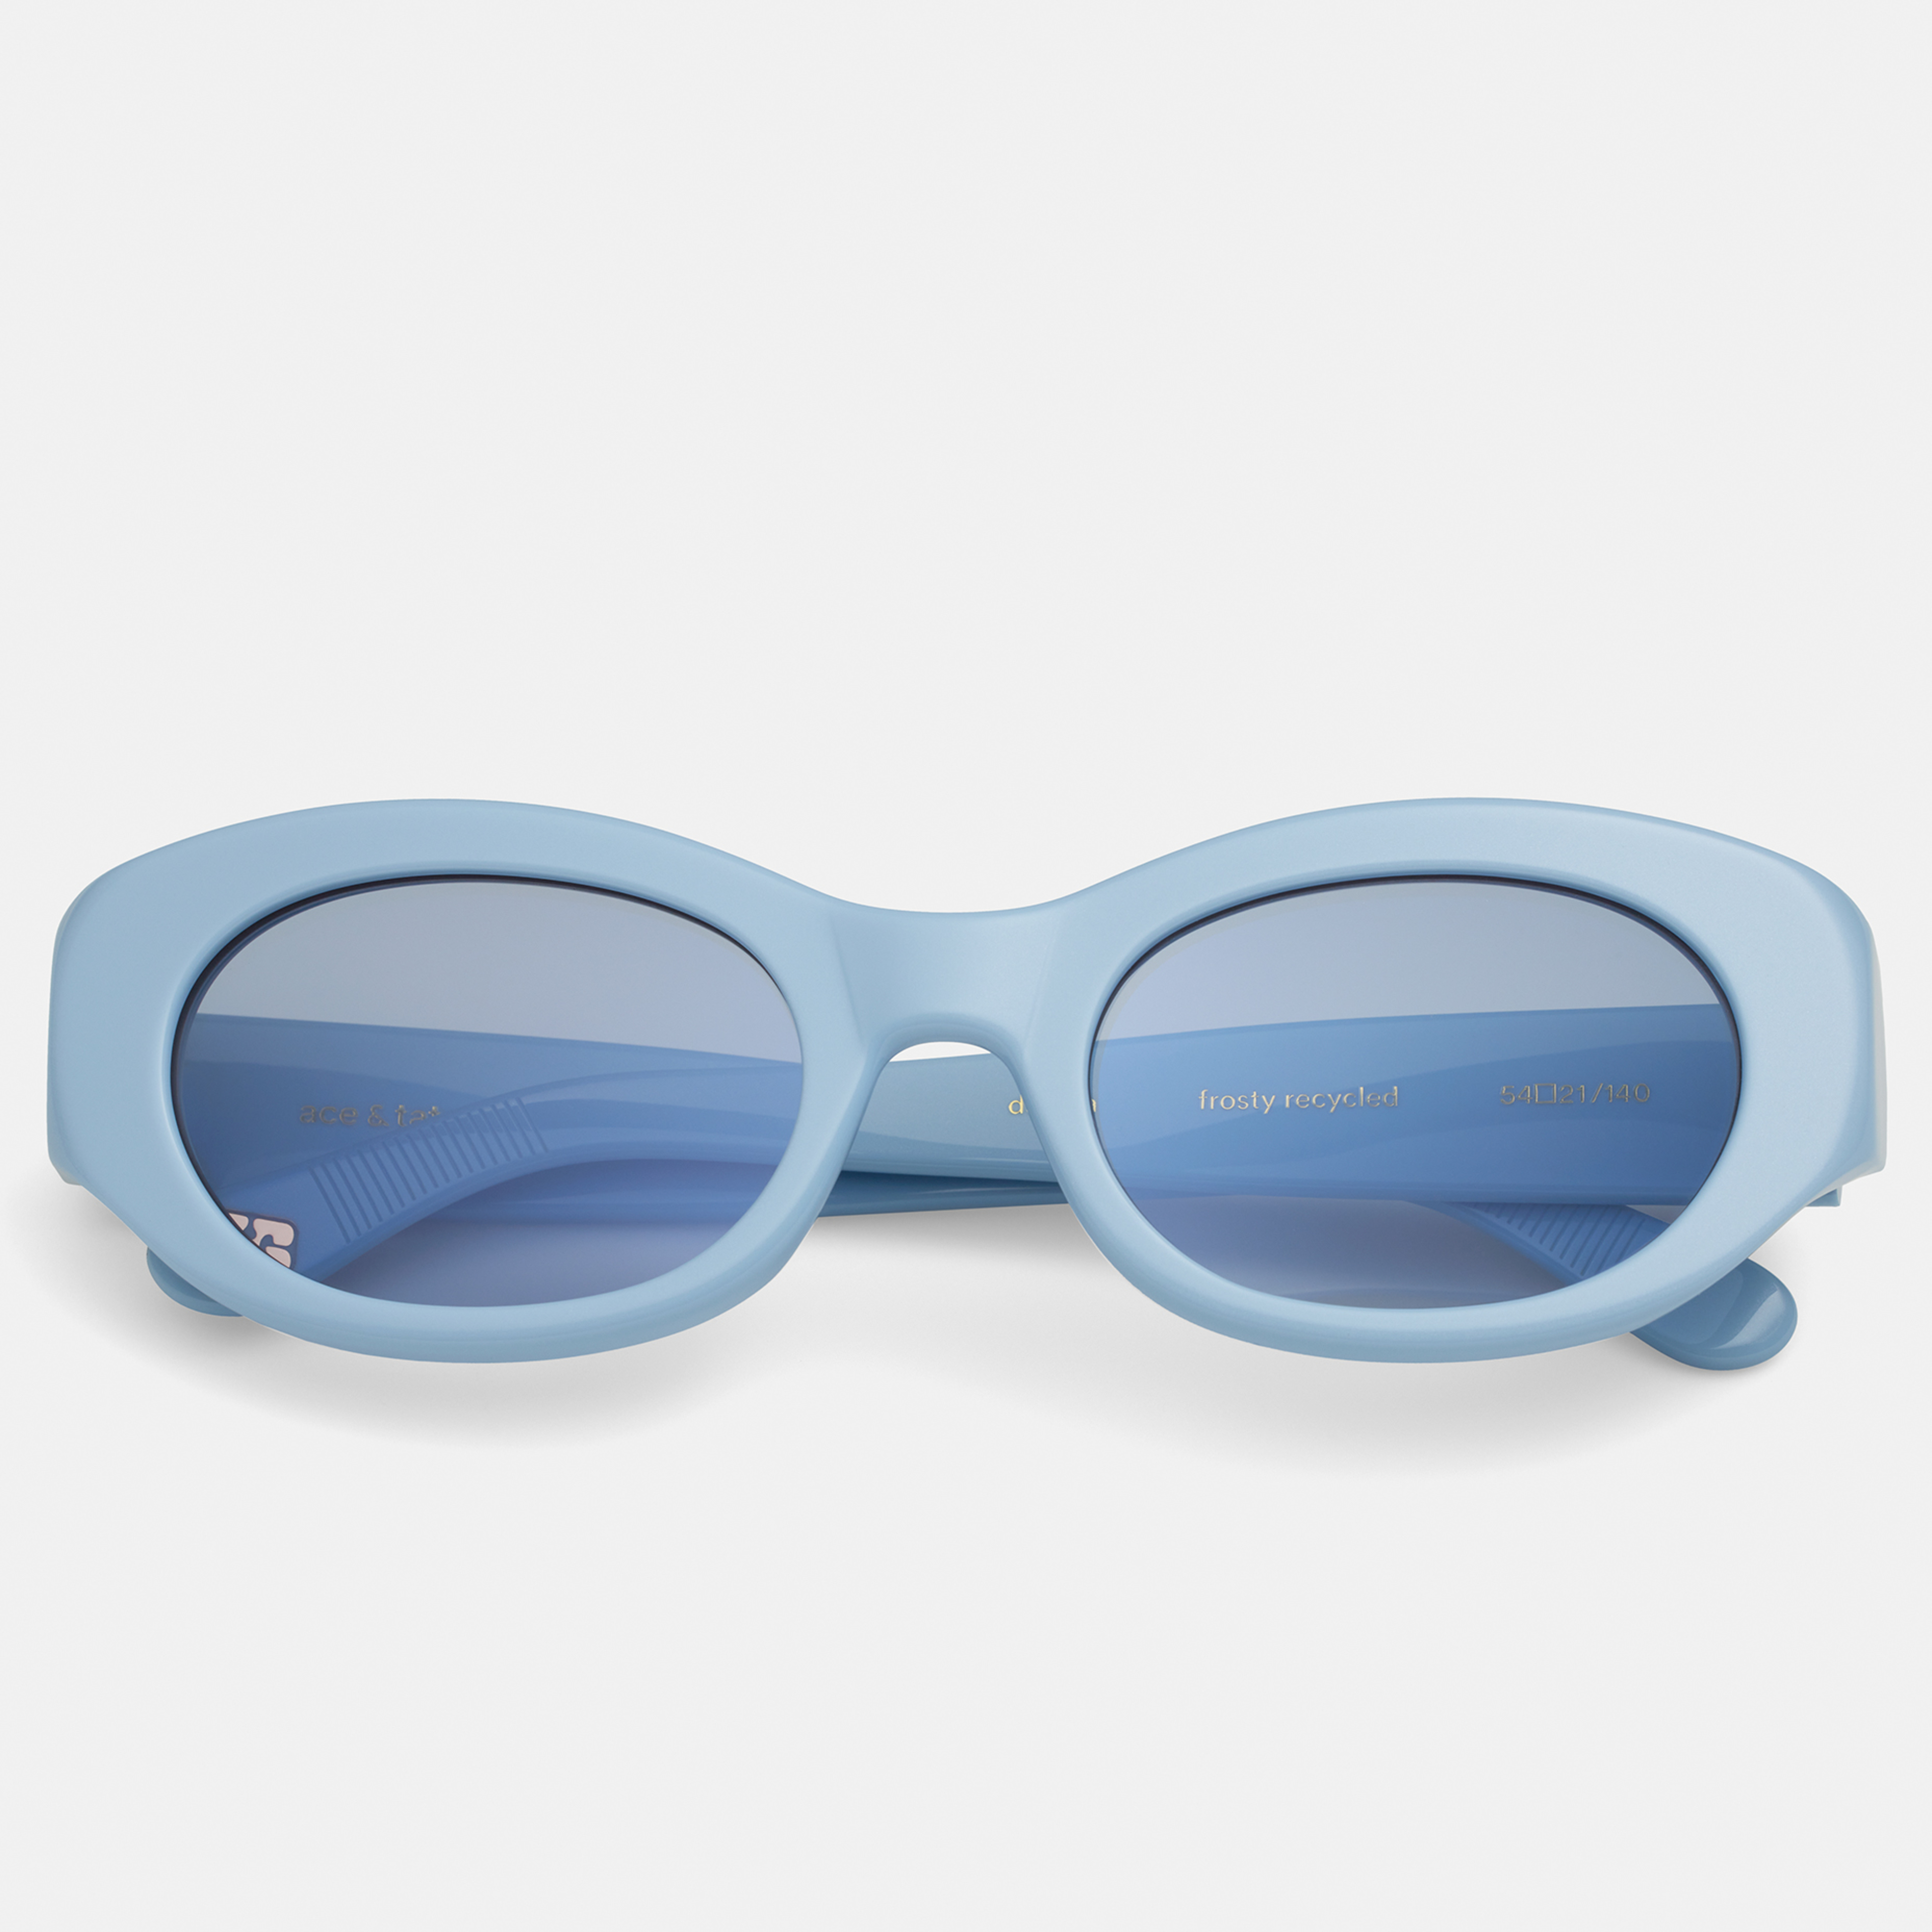 Ace & Tate Sunglasses | oval Recycled in Blue